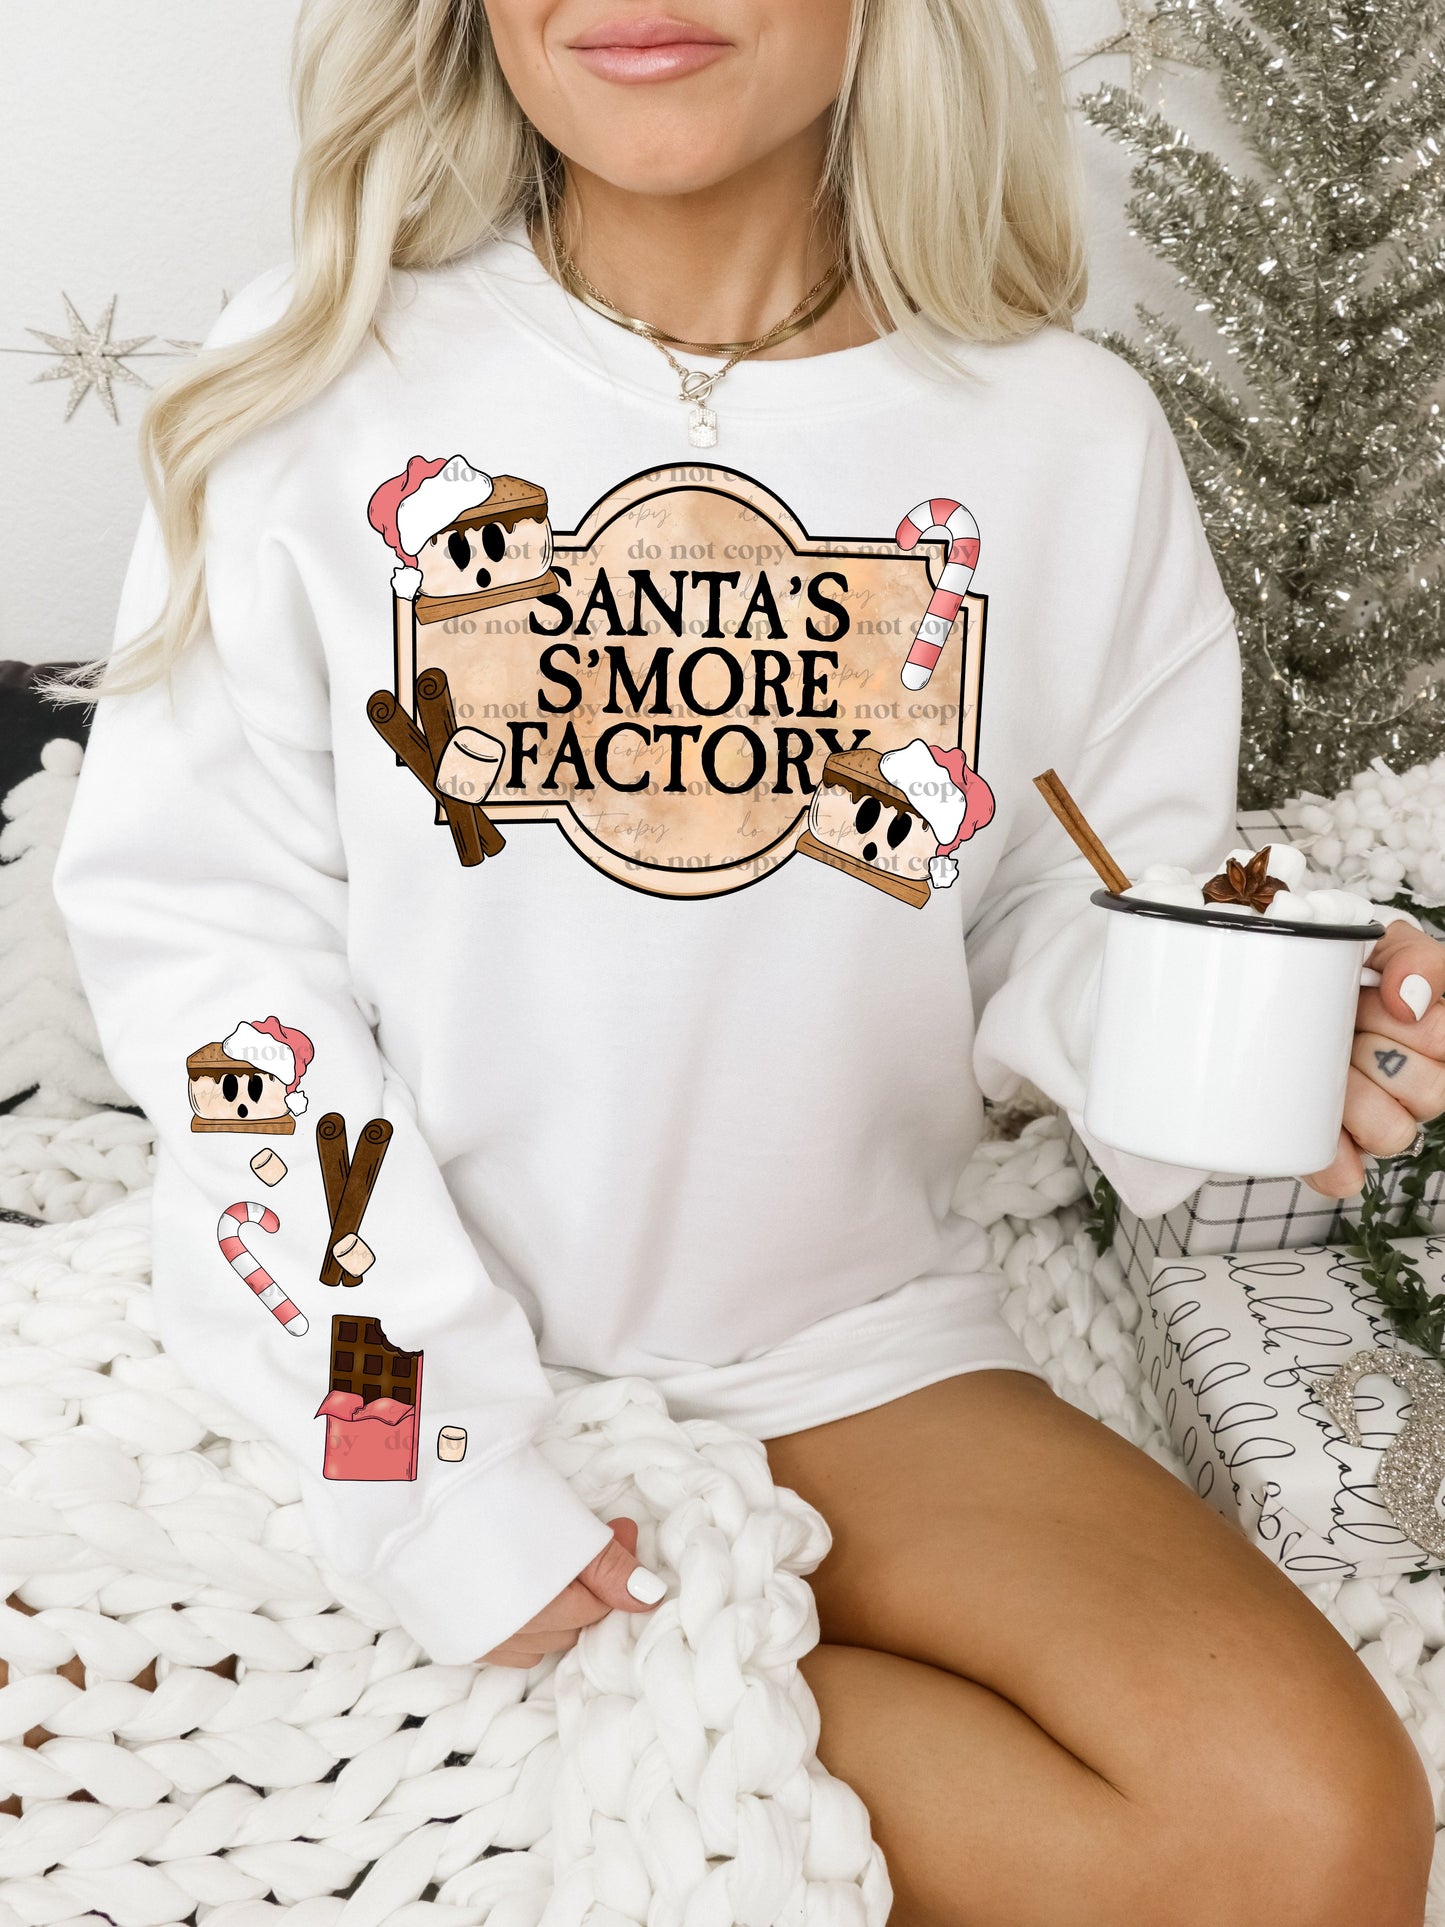 Santa's Smore Factory with sleeve